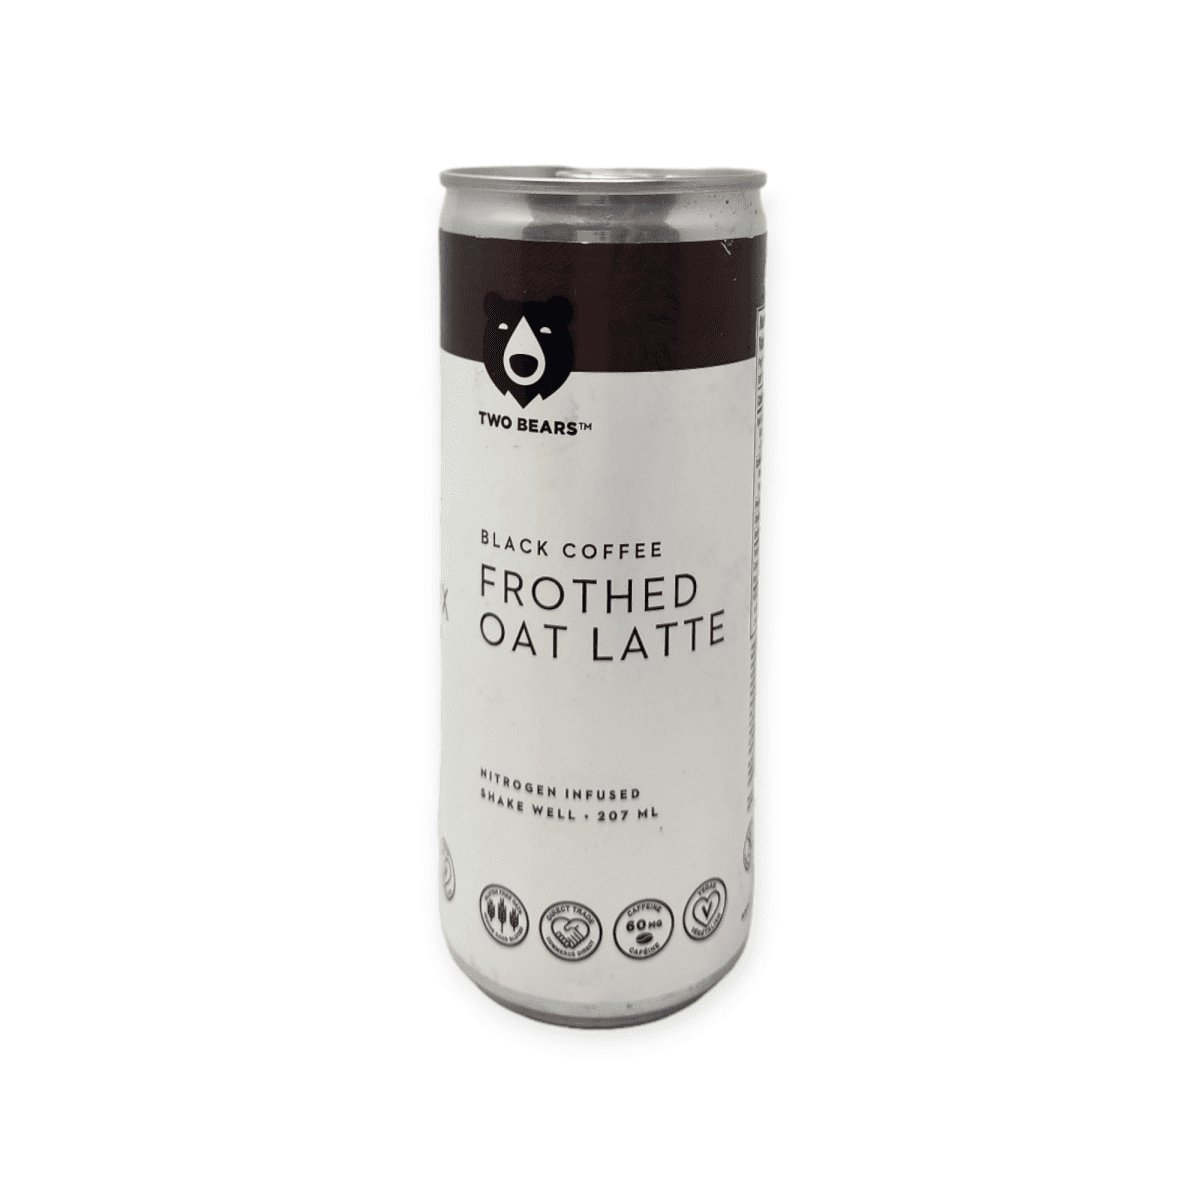 Two Bears Frothed Oat Latte Black Coffee (207mL)